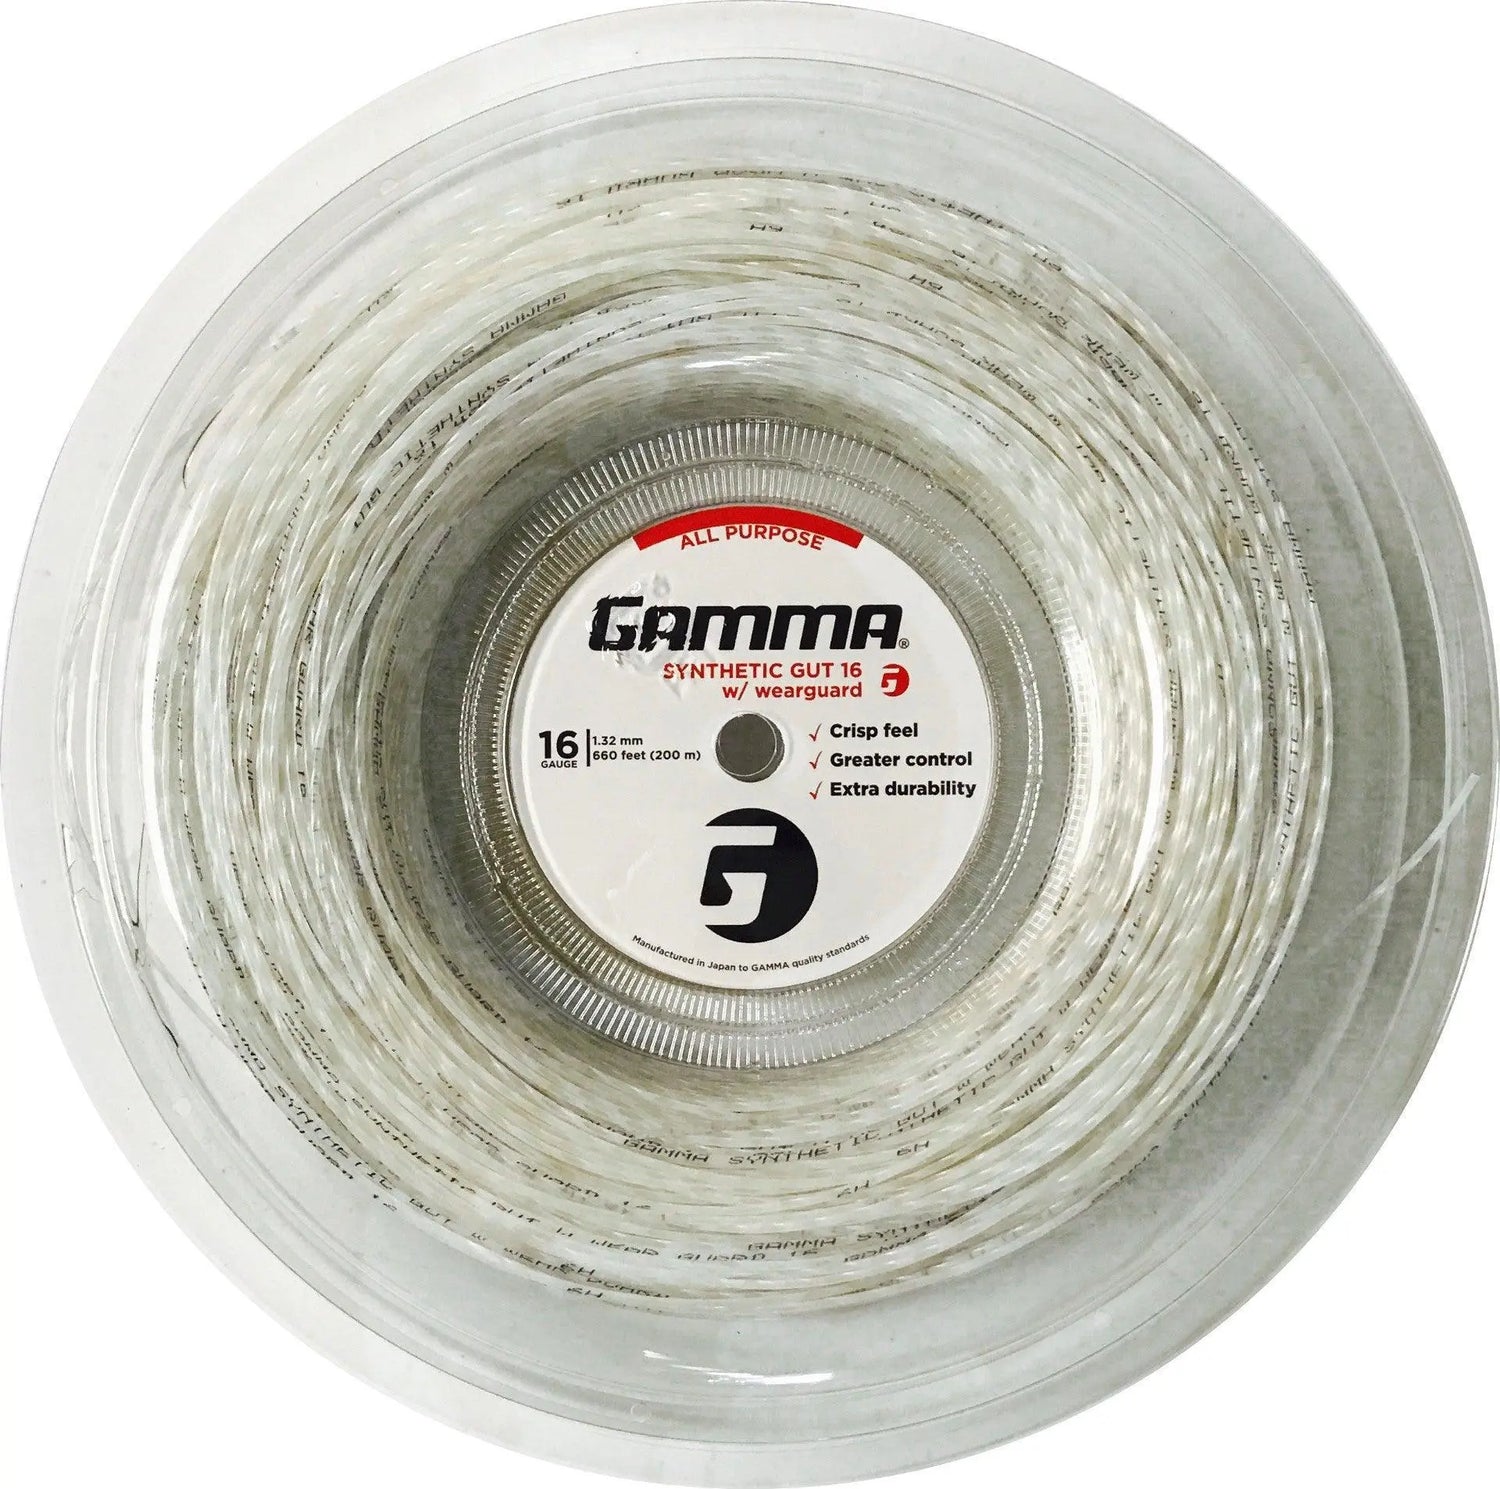 Gamma Synthetic Gut Wearguard 16 String - 660 ft Reel